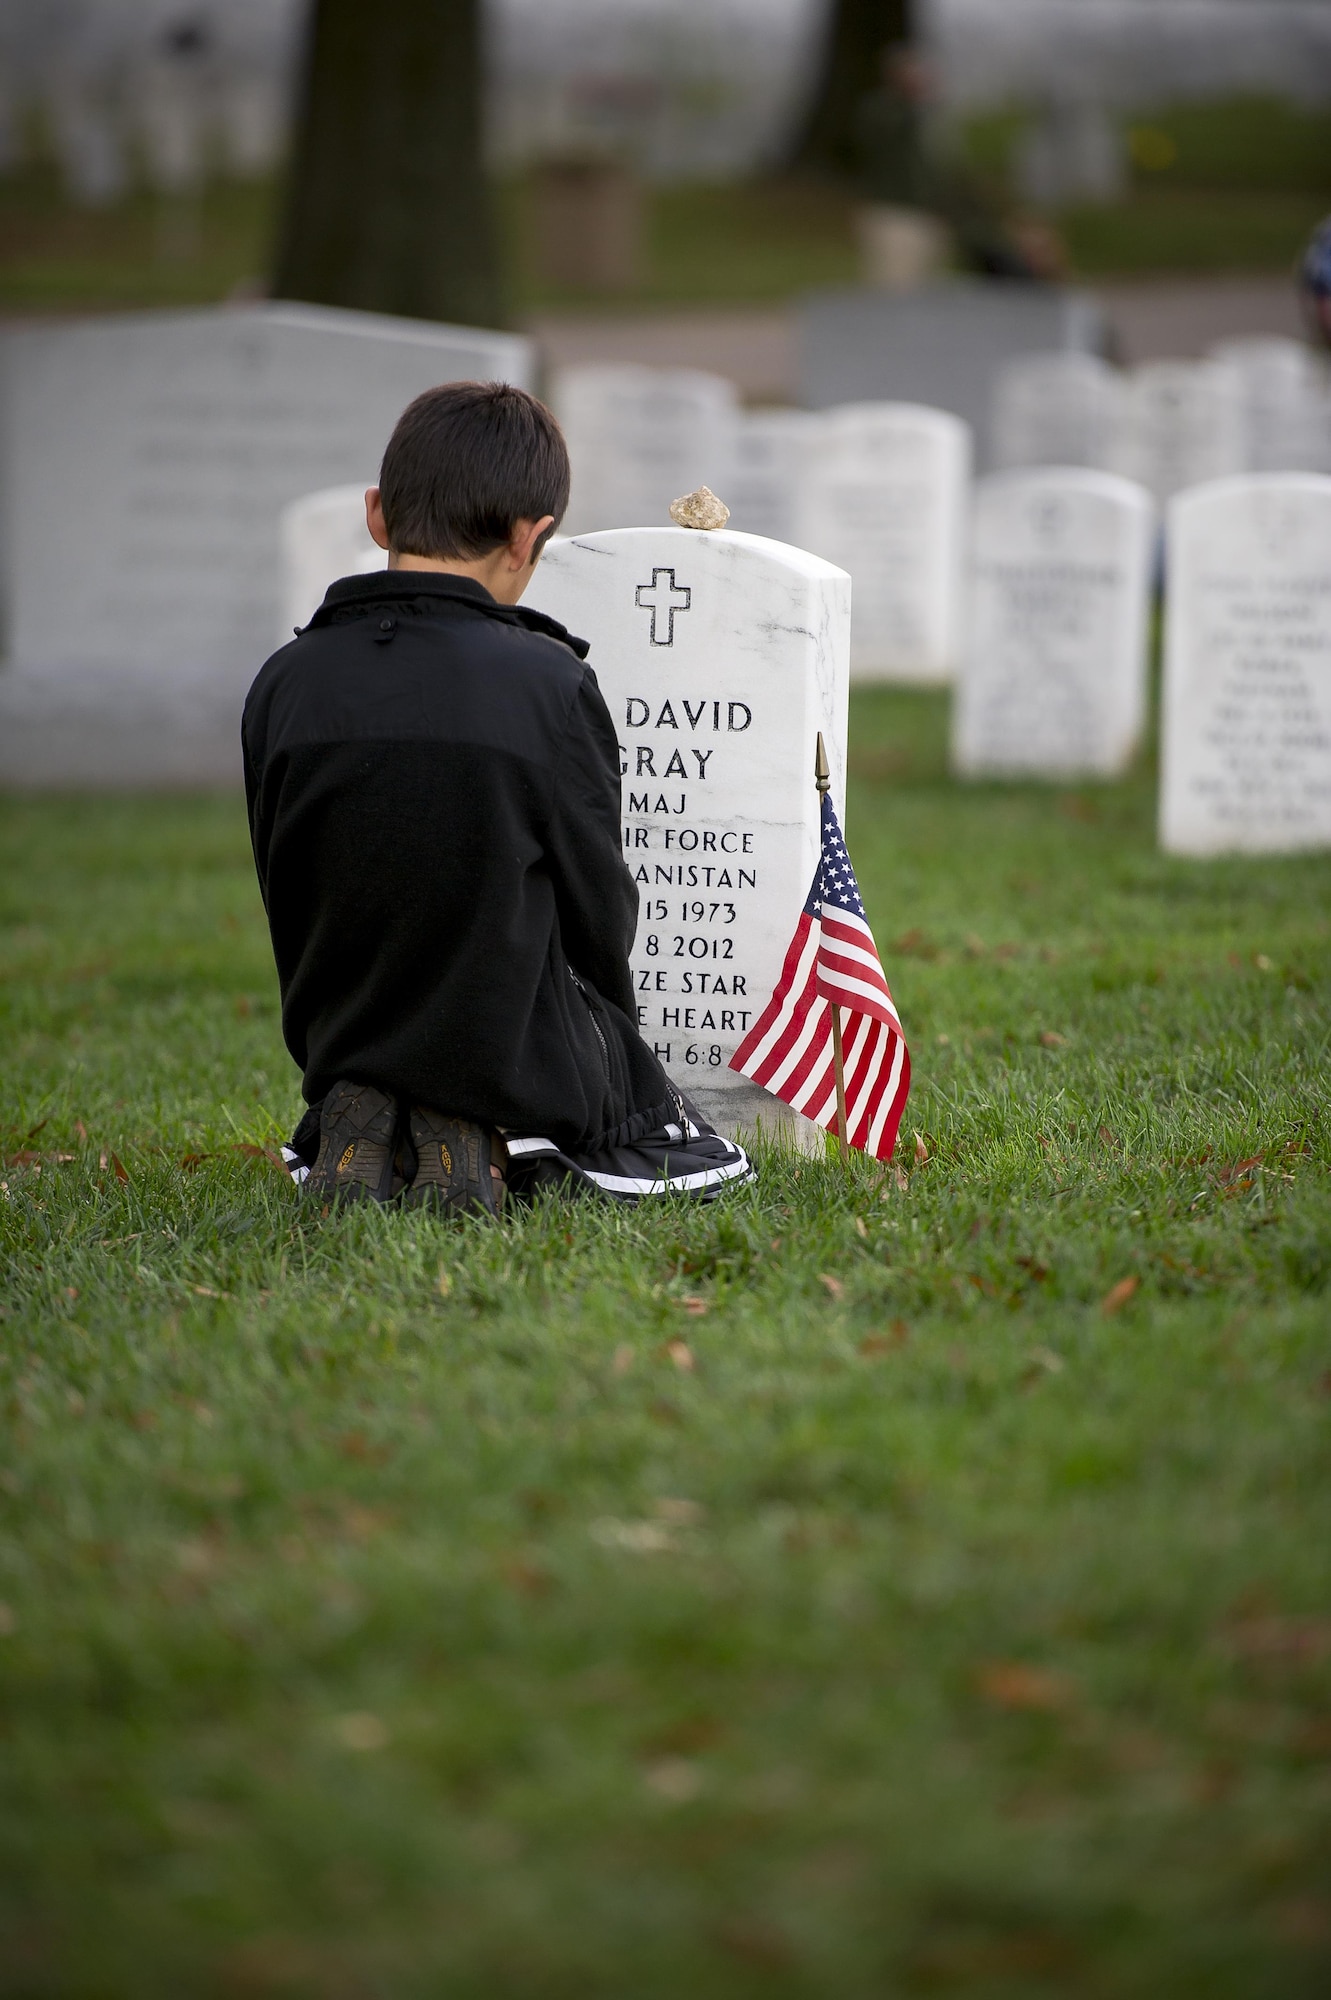 Garrett Gray, 9, kneels in front of the headstone for his father, Maj. David Gray, at Arlington National Cemetery, Va., Nov. 11, 2015. His father was killed in action Aug. 8, 2012, during a deployment to Afghanistan. David’s wife, Heather, and her three children moved from Colorado, where David was stationed at Fort Carson, earlier this year for the first time since his death. (U.S. Air Force photo/Staff Sgt. Christopher Gross)